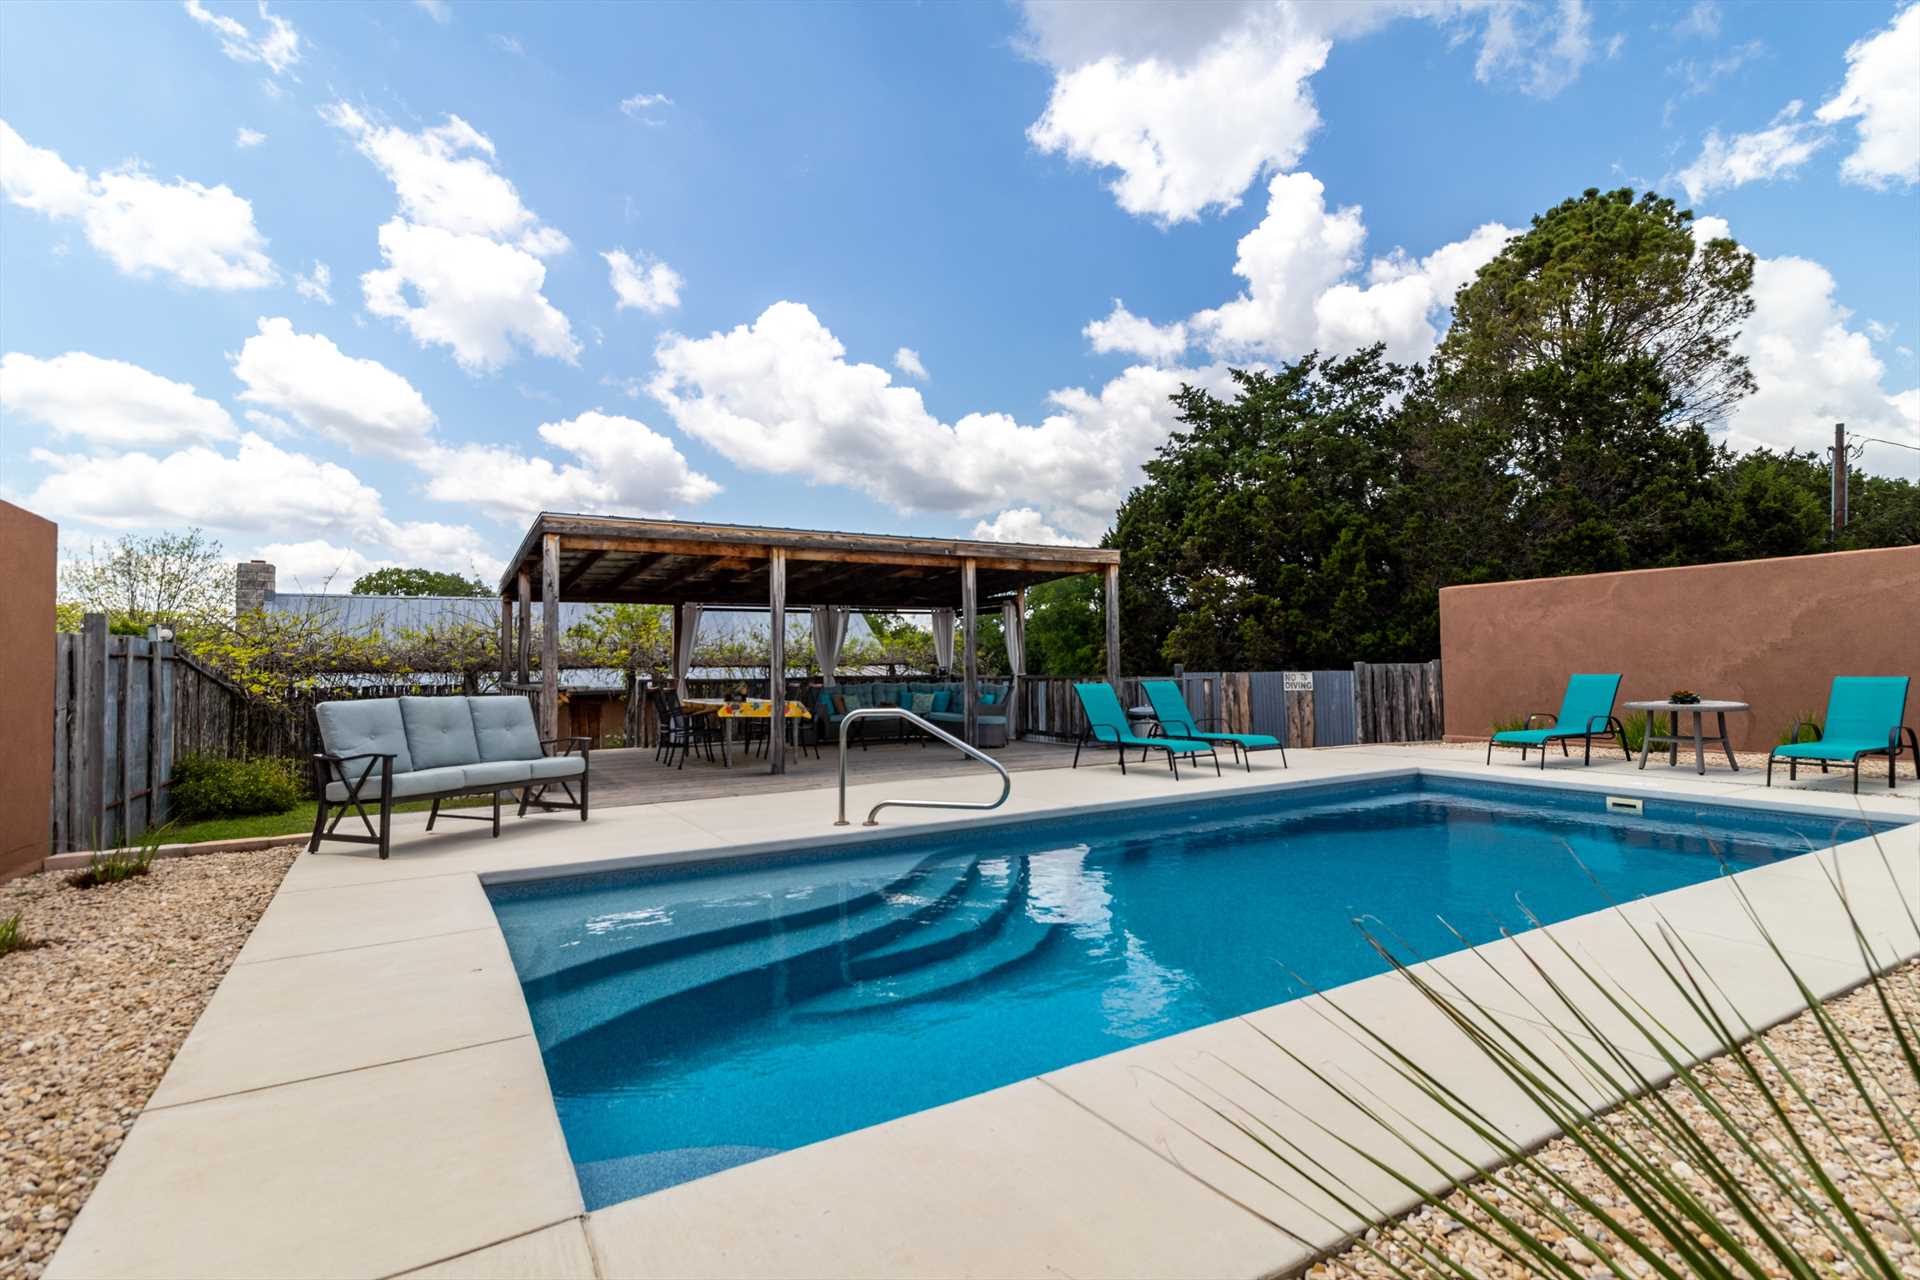                                                 Whether you'd like to lounge in the sun's rays, or you'd prefer a shadier spot to kick back, the pool area is nicely set up with both!